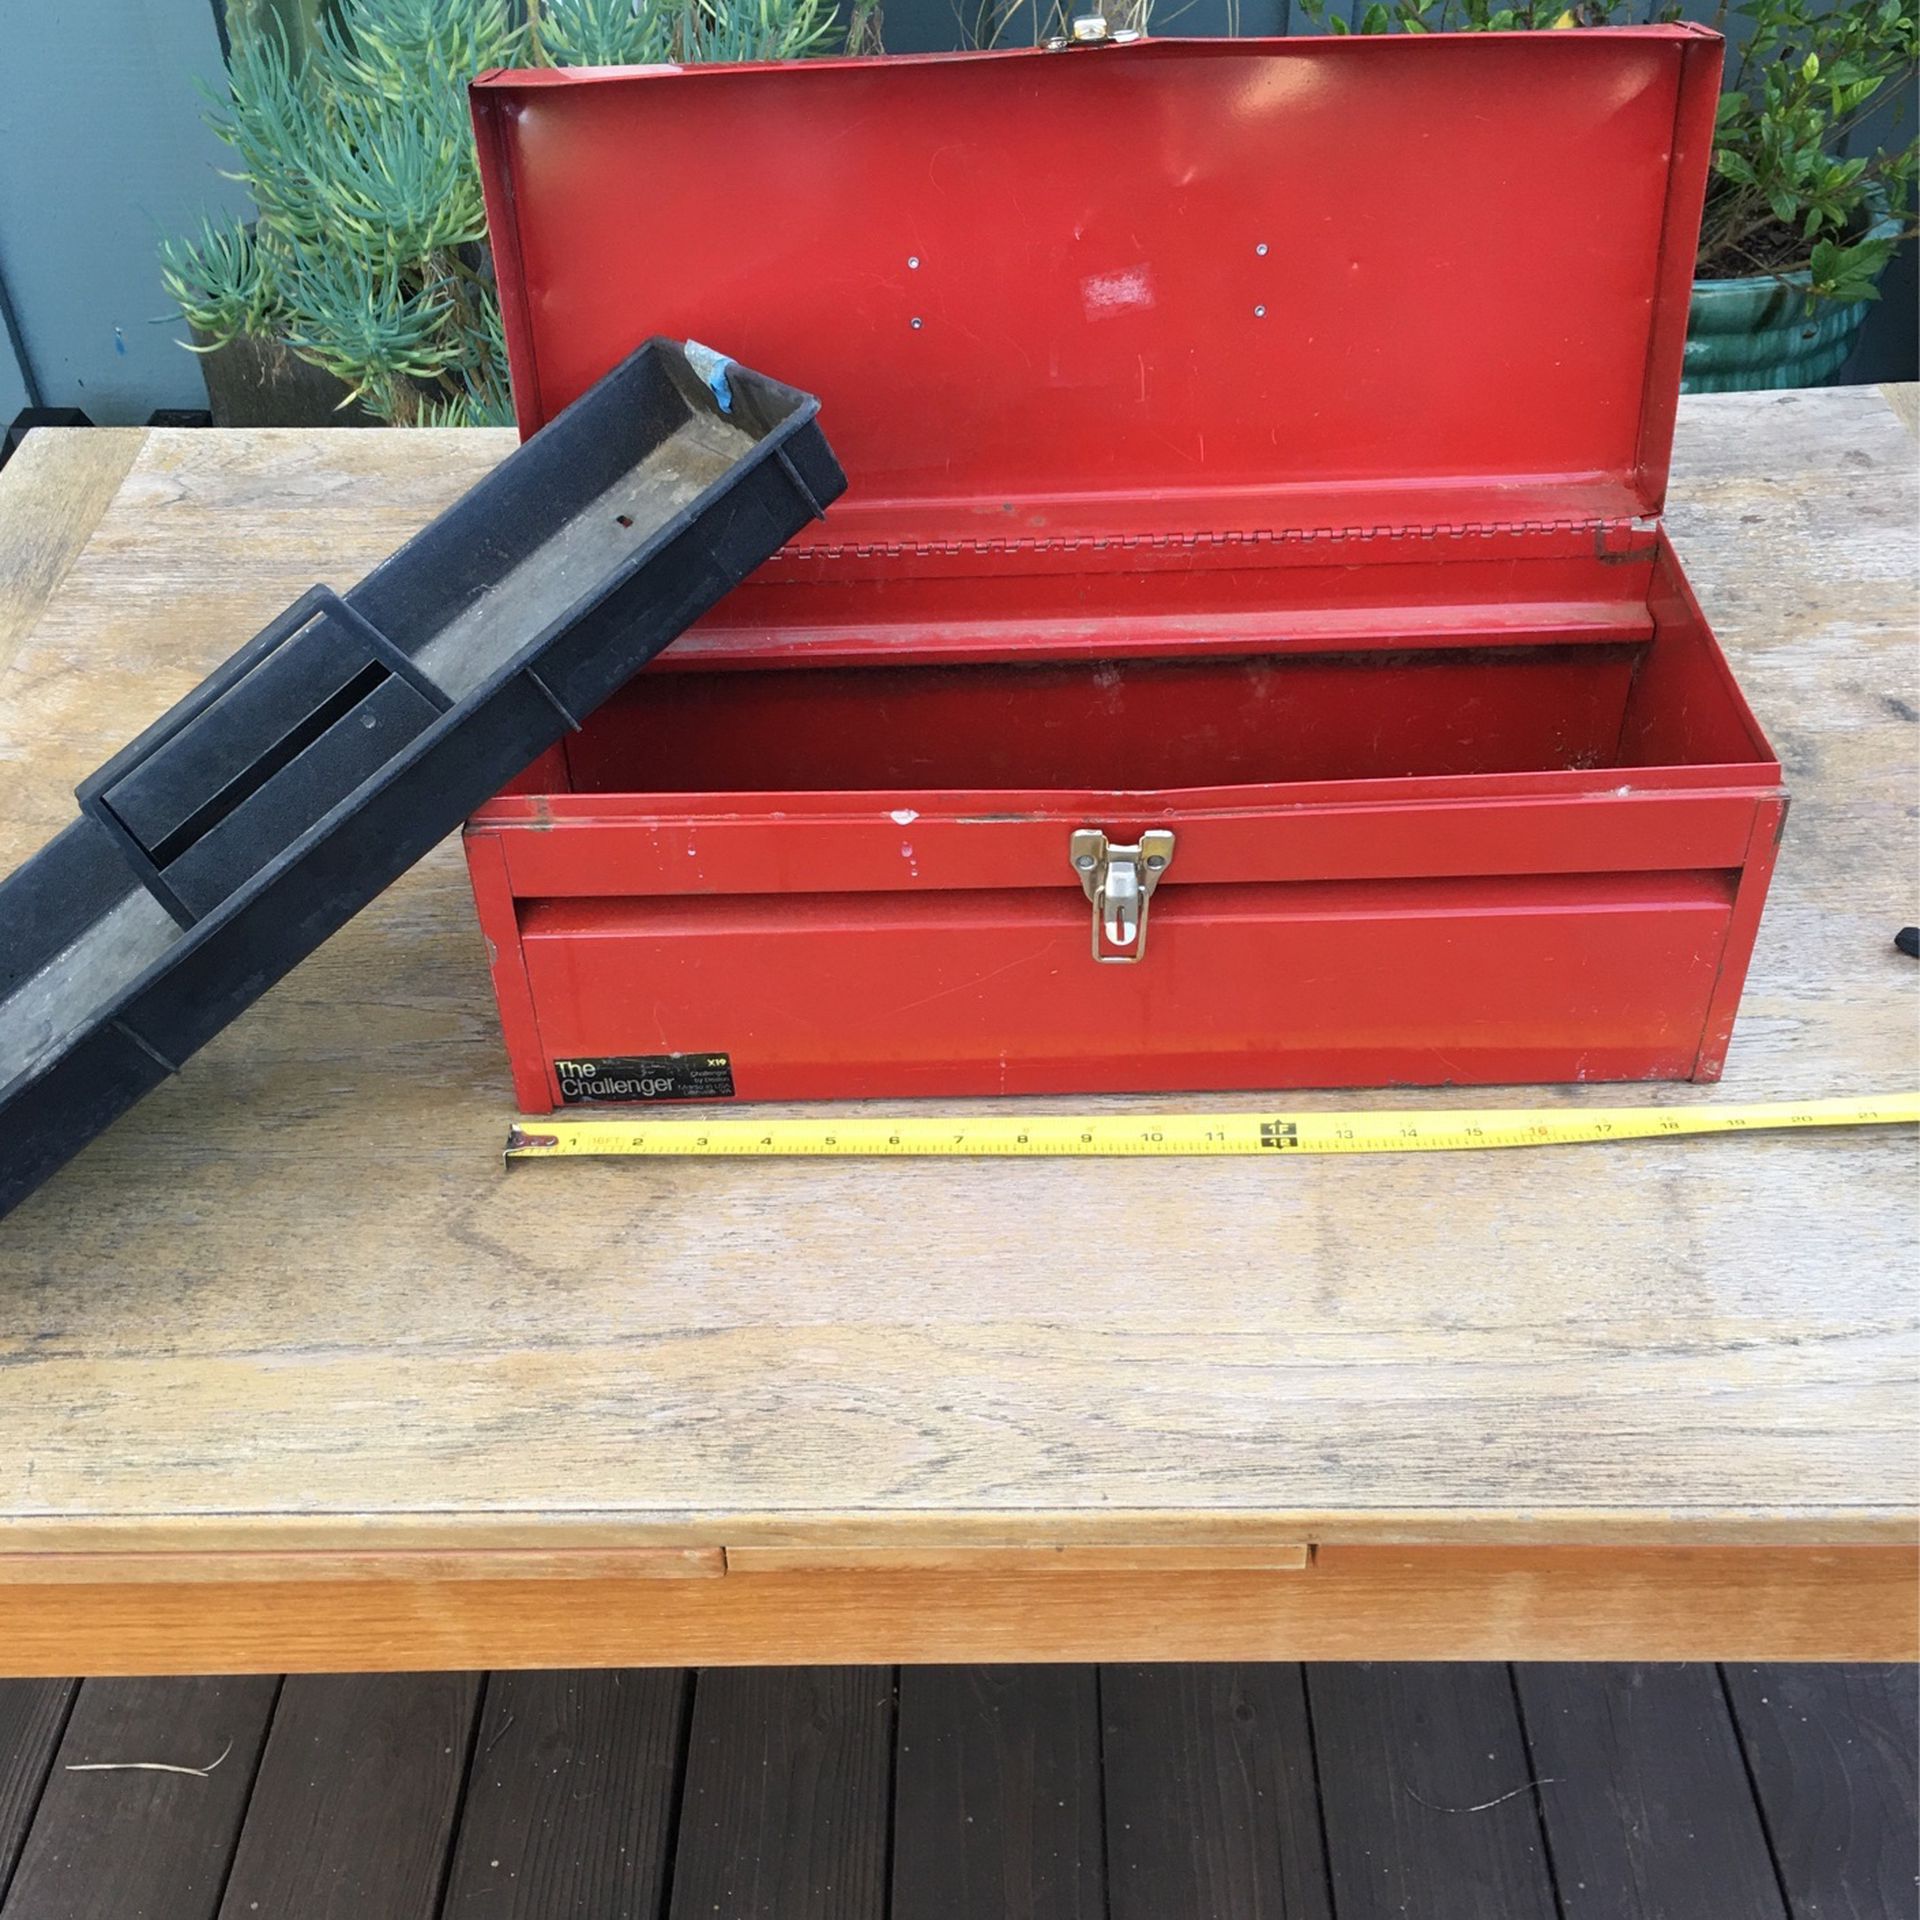 Vintage Red 19” Metal Toolbox 🧰 The Challenger